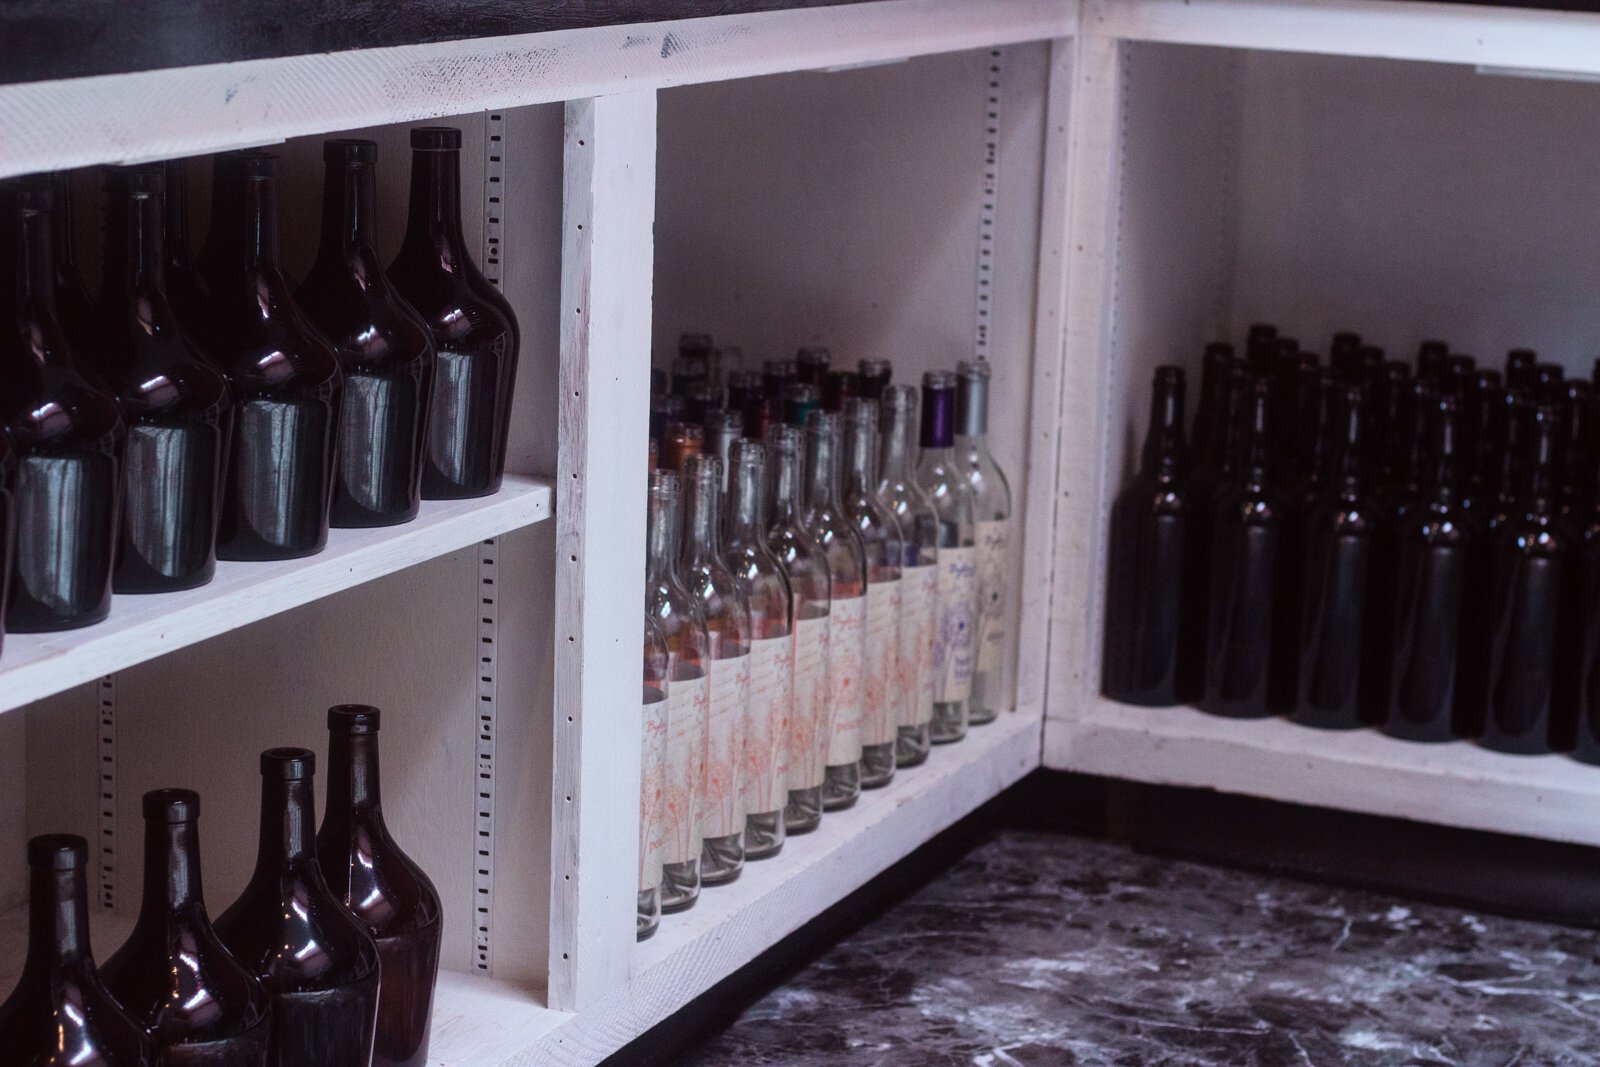 Wine bottles, which are not able to be recycled, are given a second life at All the Rage.